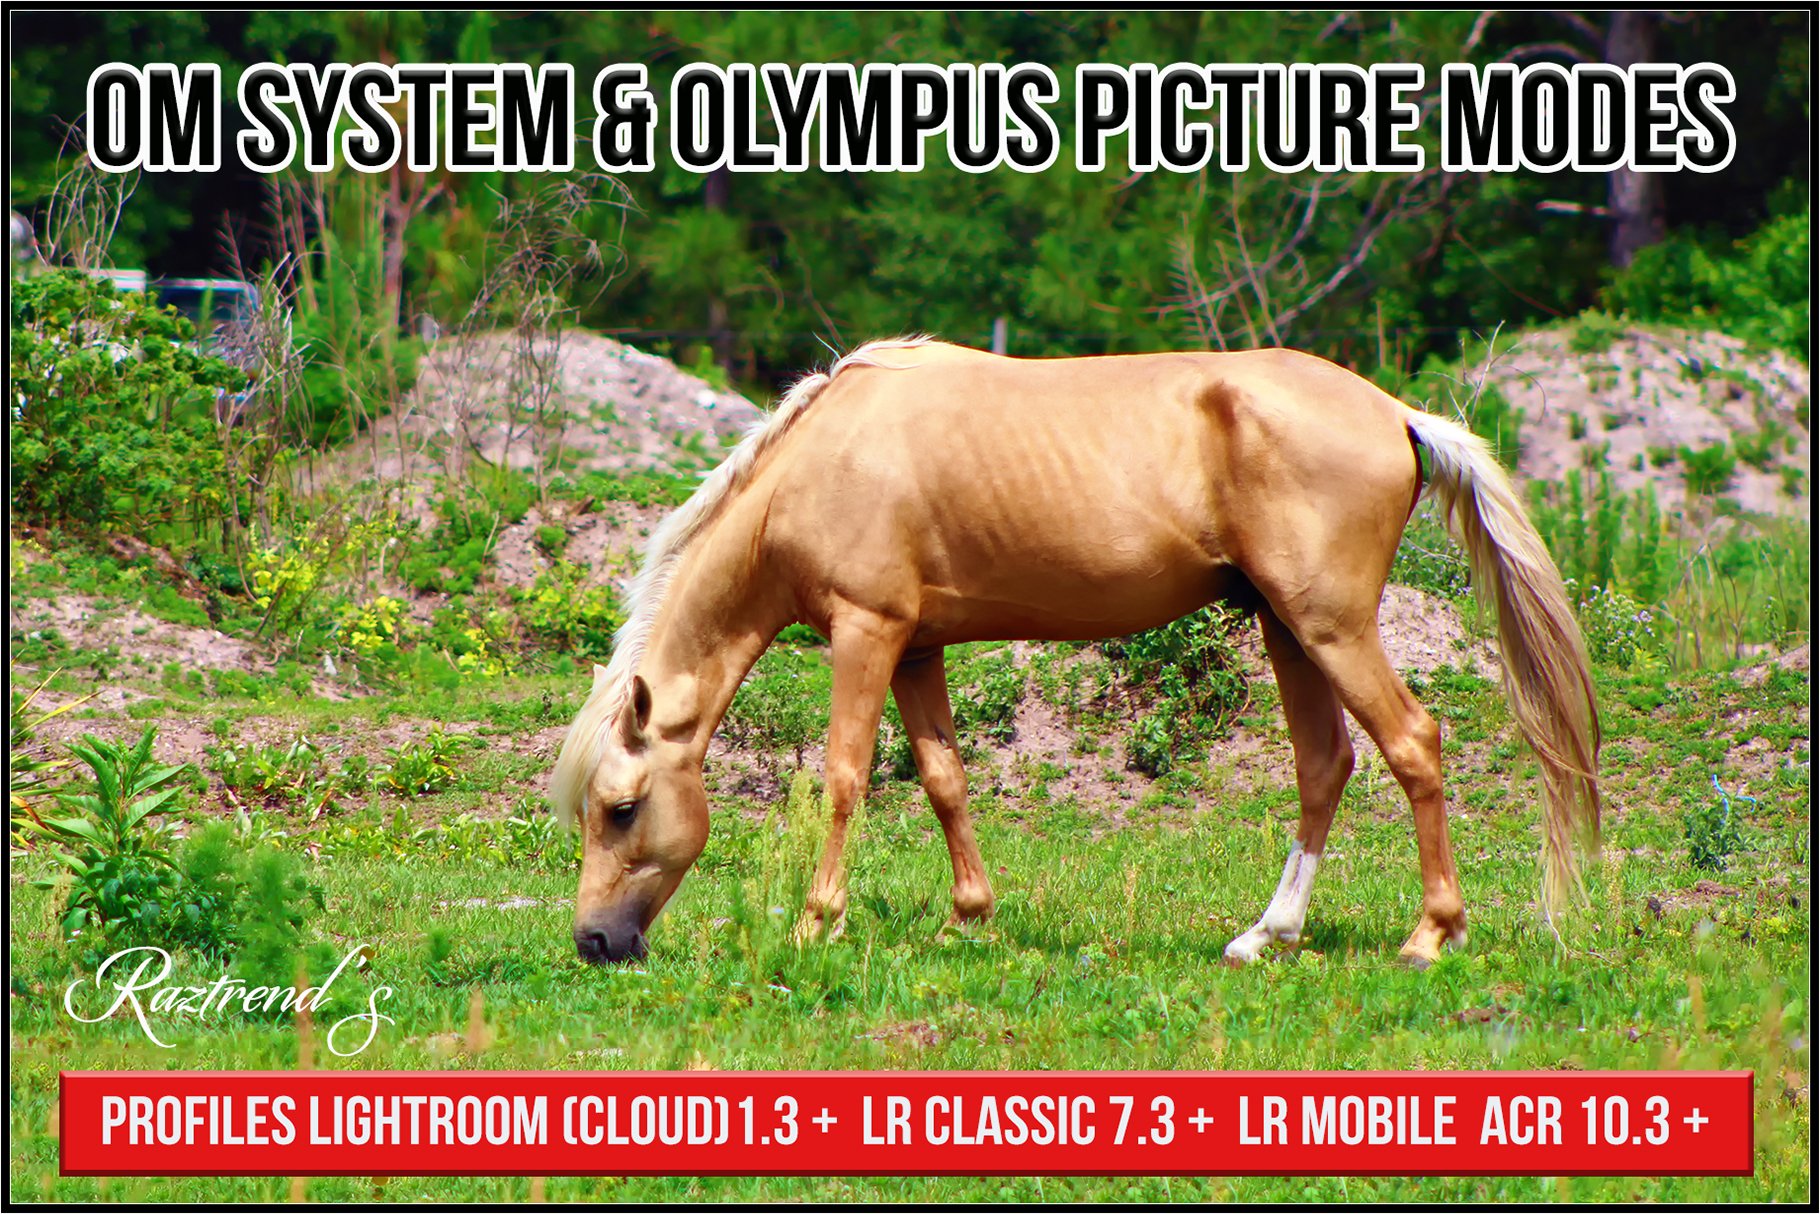 OM System & Olympus Picture Modescover image.